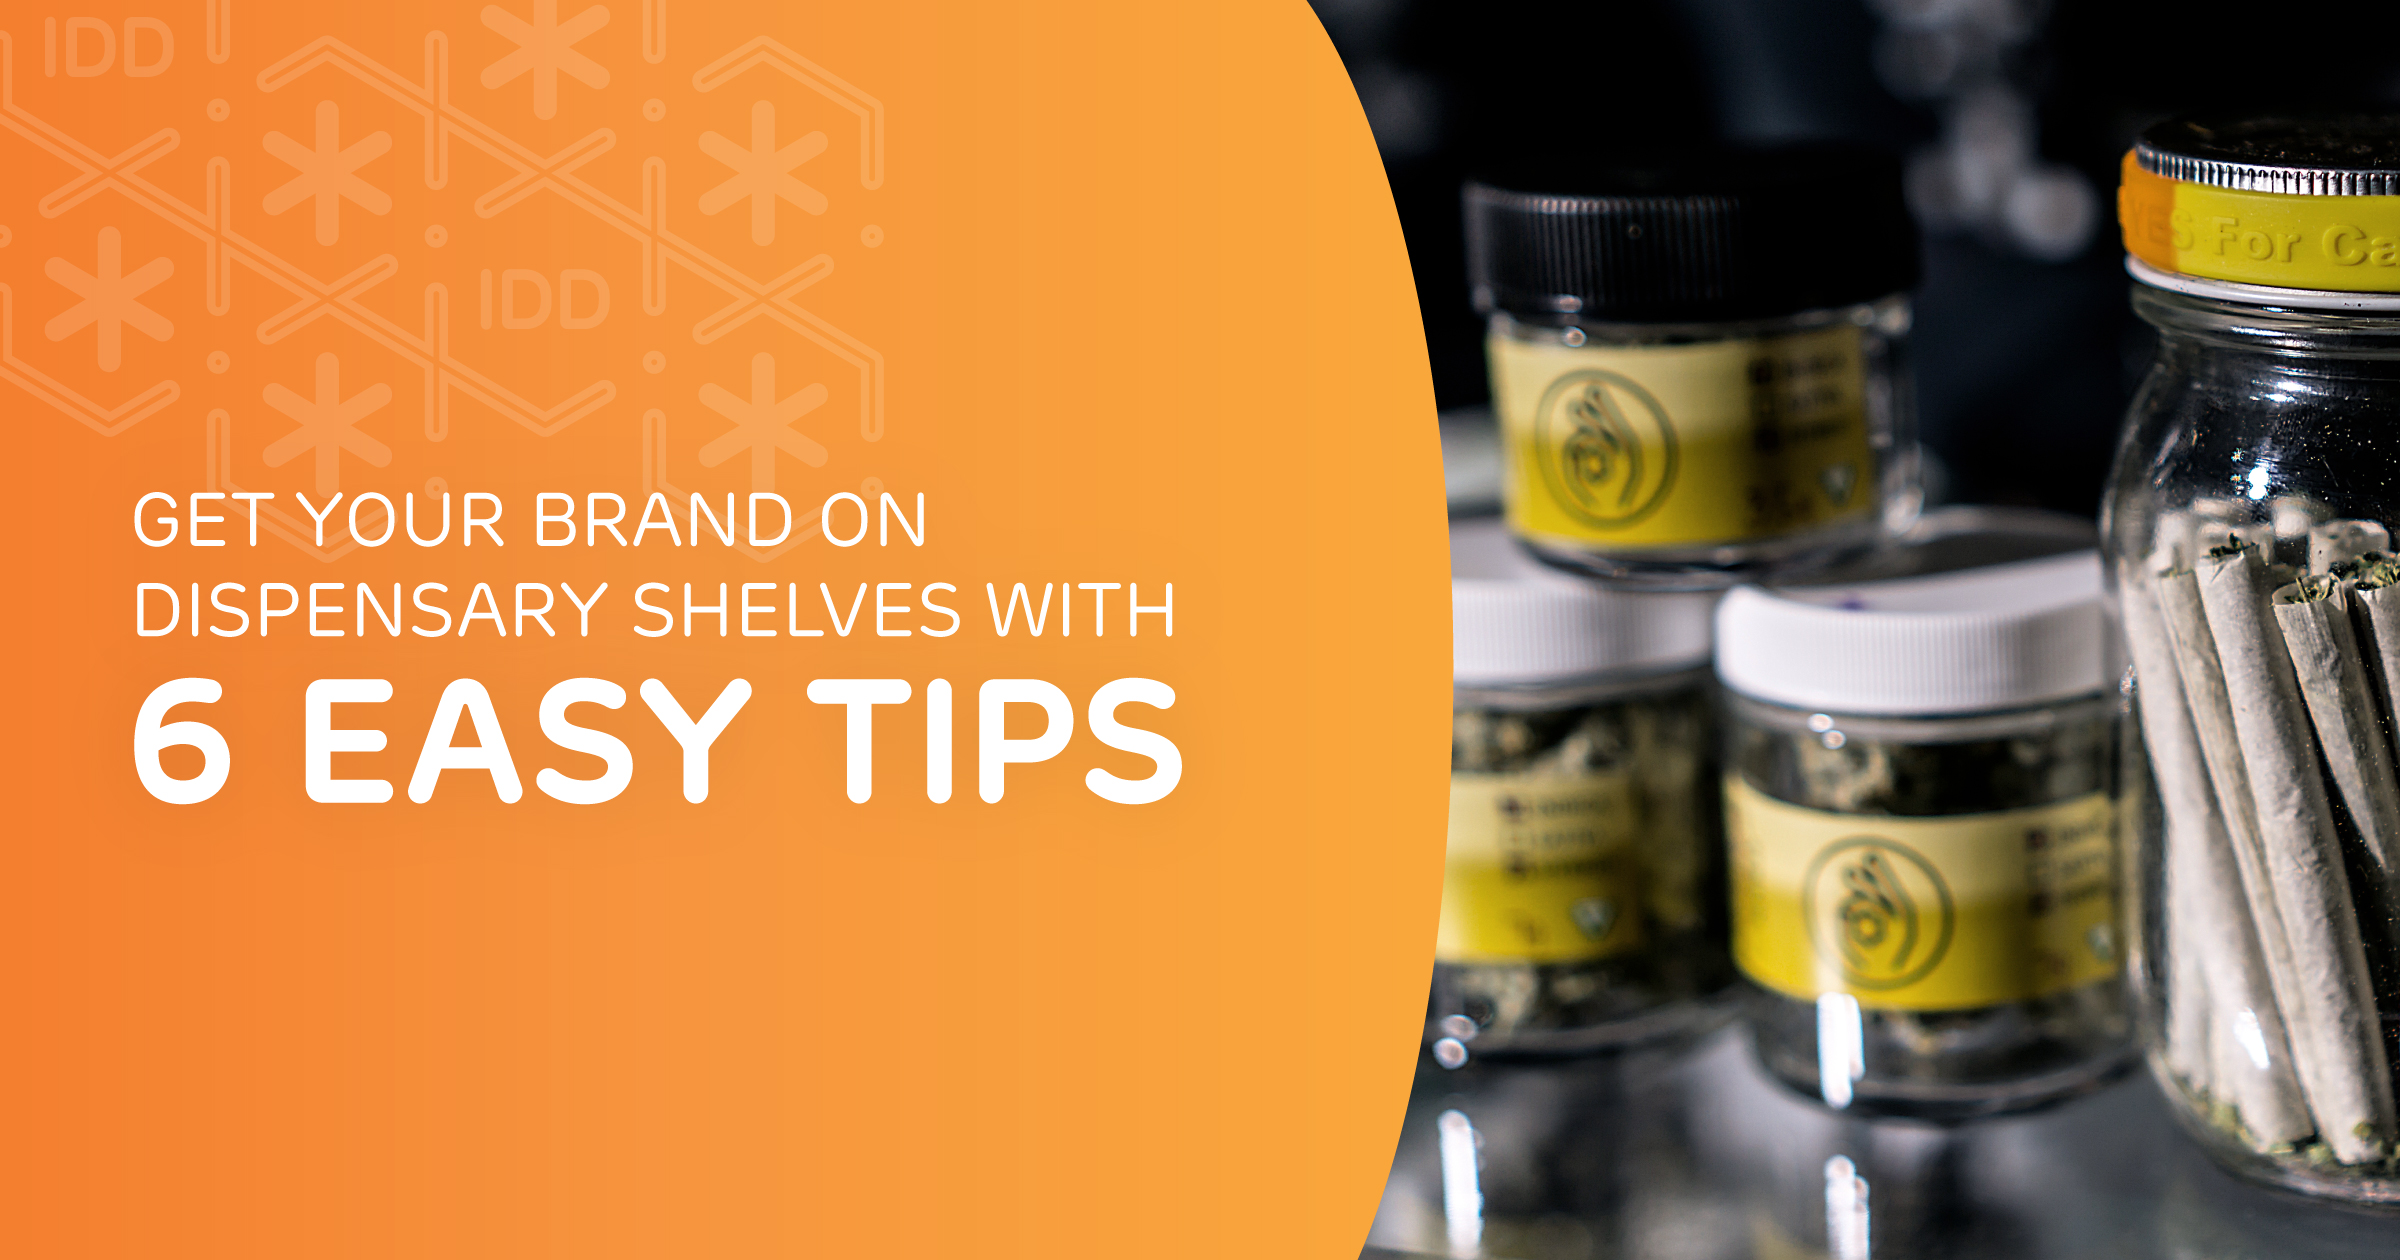 6 Tips to Get Your Brand on Dispensary Shelves